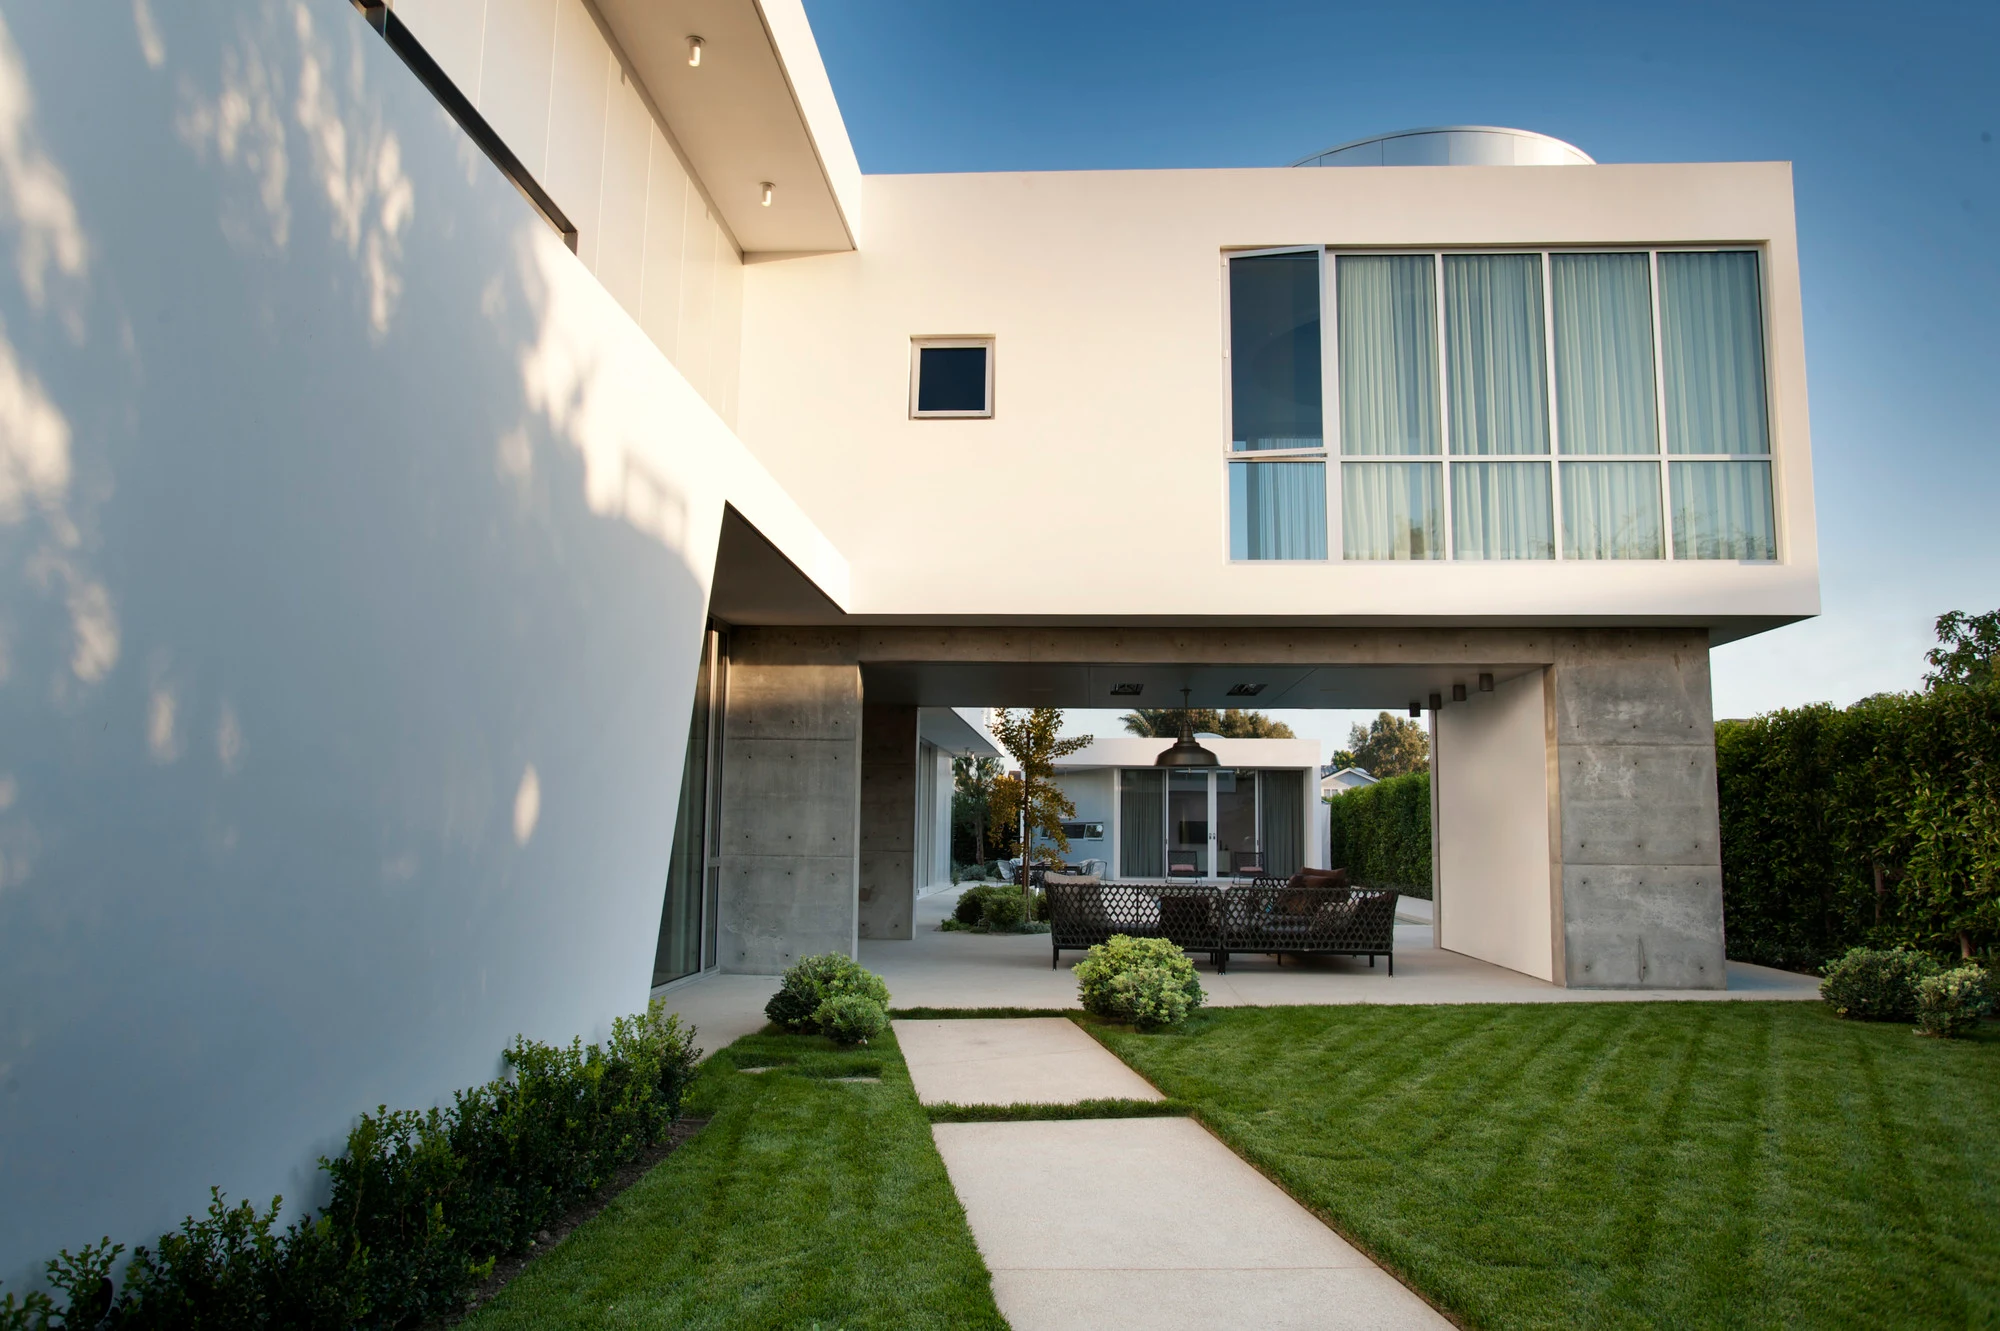 Modern Family Home \/ Dennis Gibbens Architects | ArchDaily